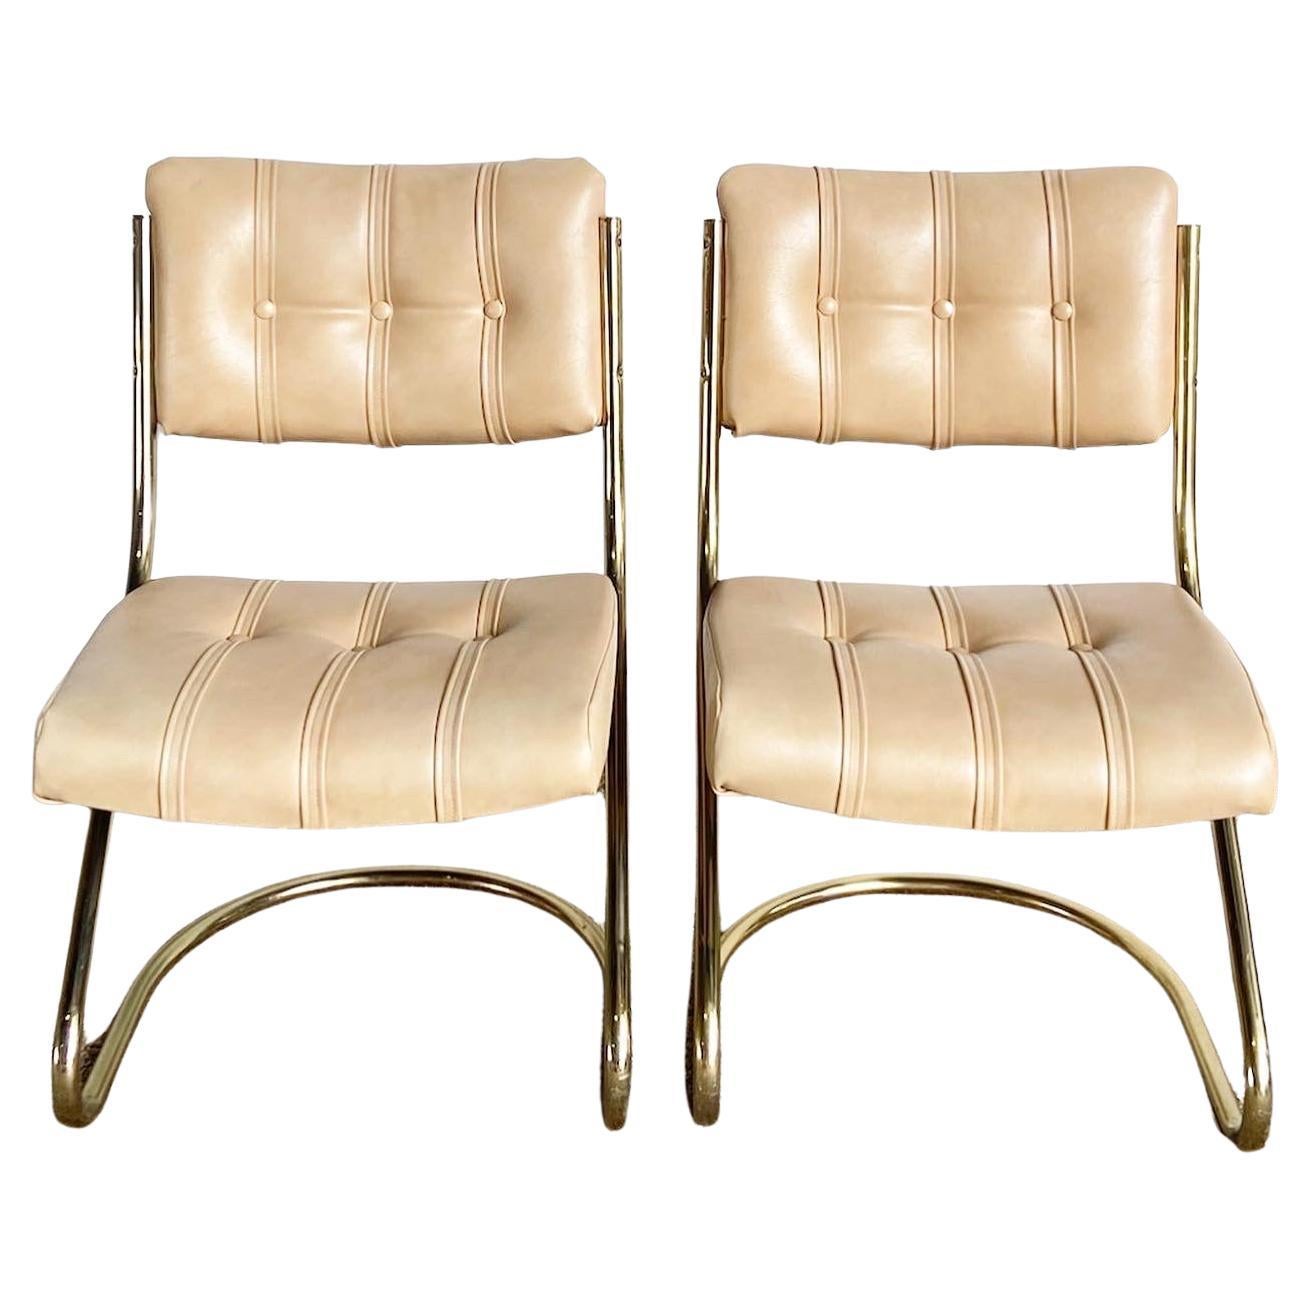 Mid Century Modern Gold and Tan Tufted Cantilever Chairs by Chromcraft - a Pair For Sale